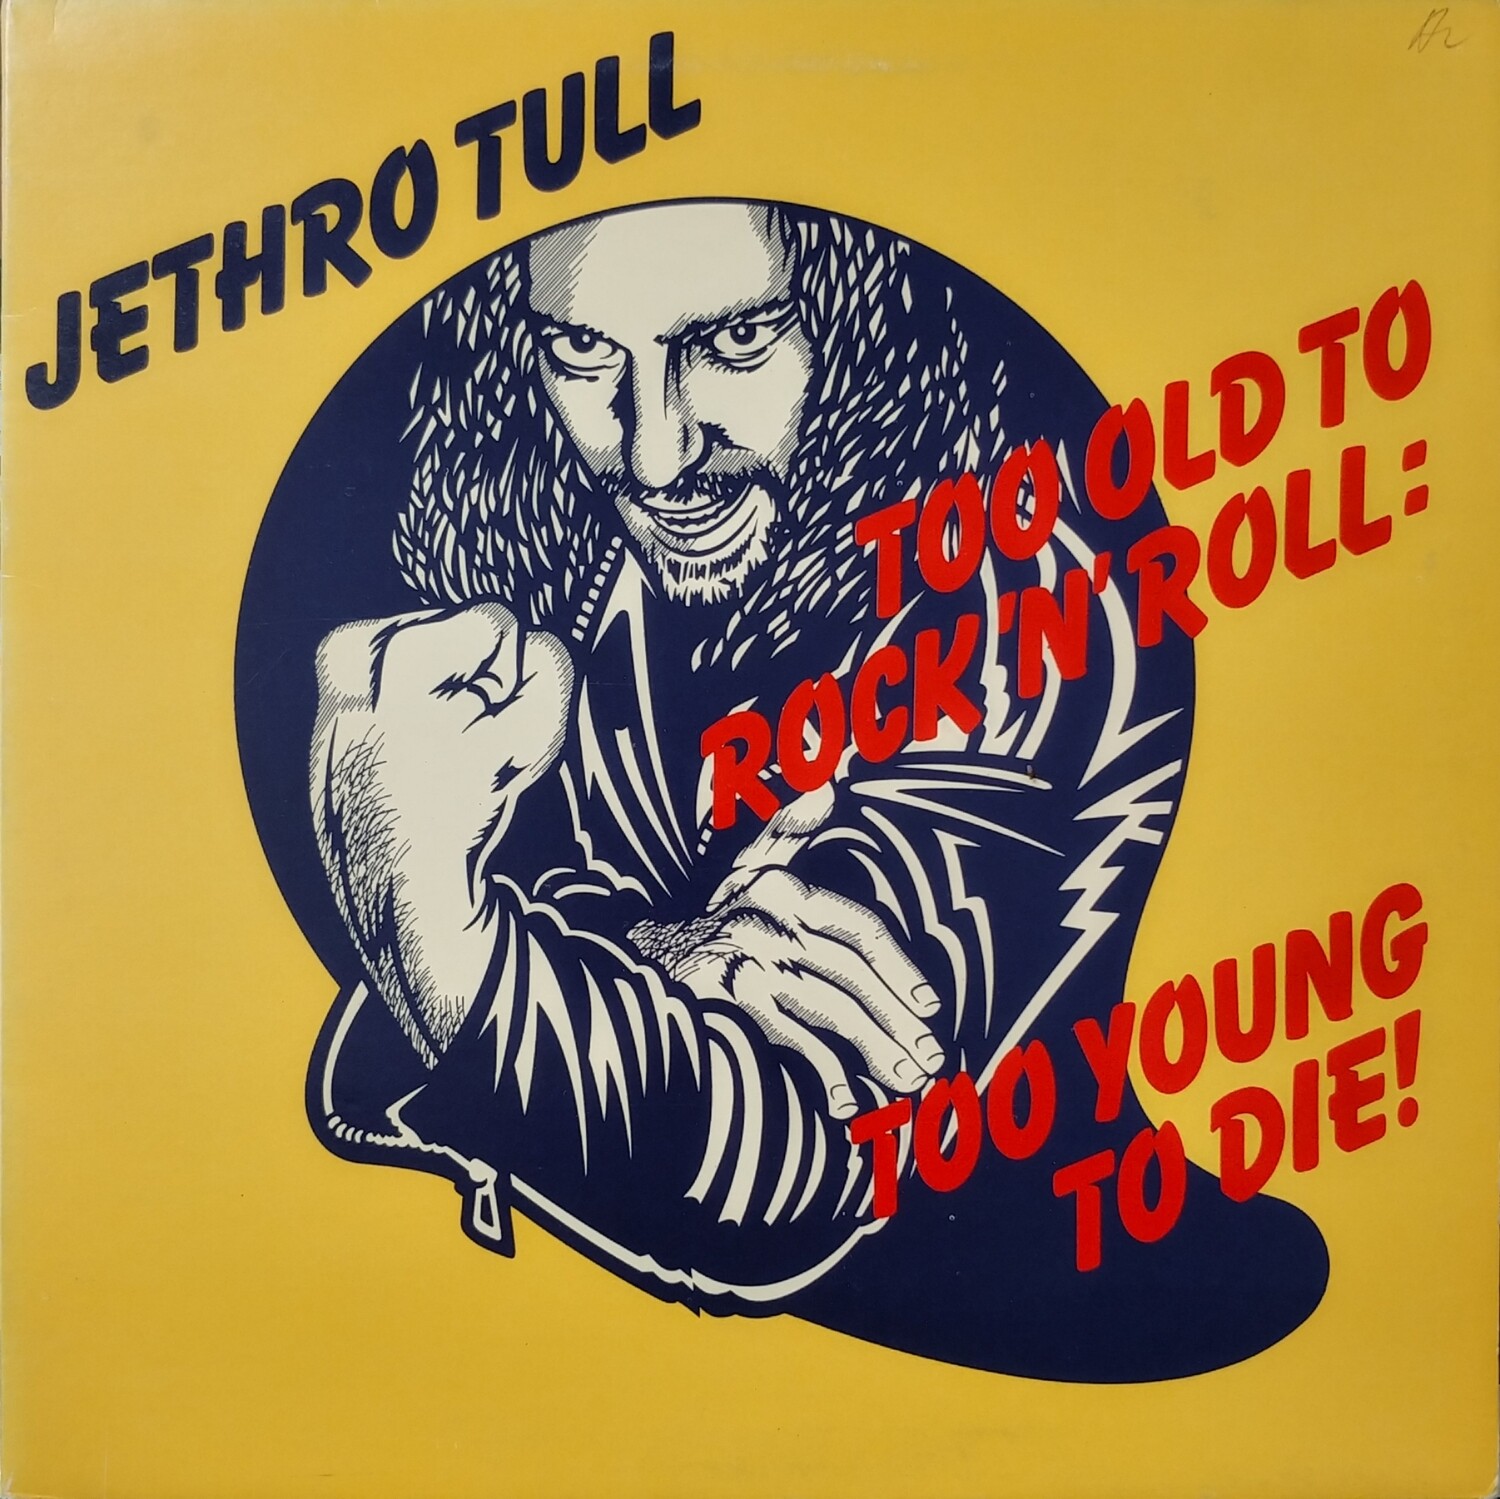 Jethro Tull - Too old to rock n roll